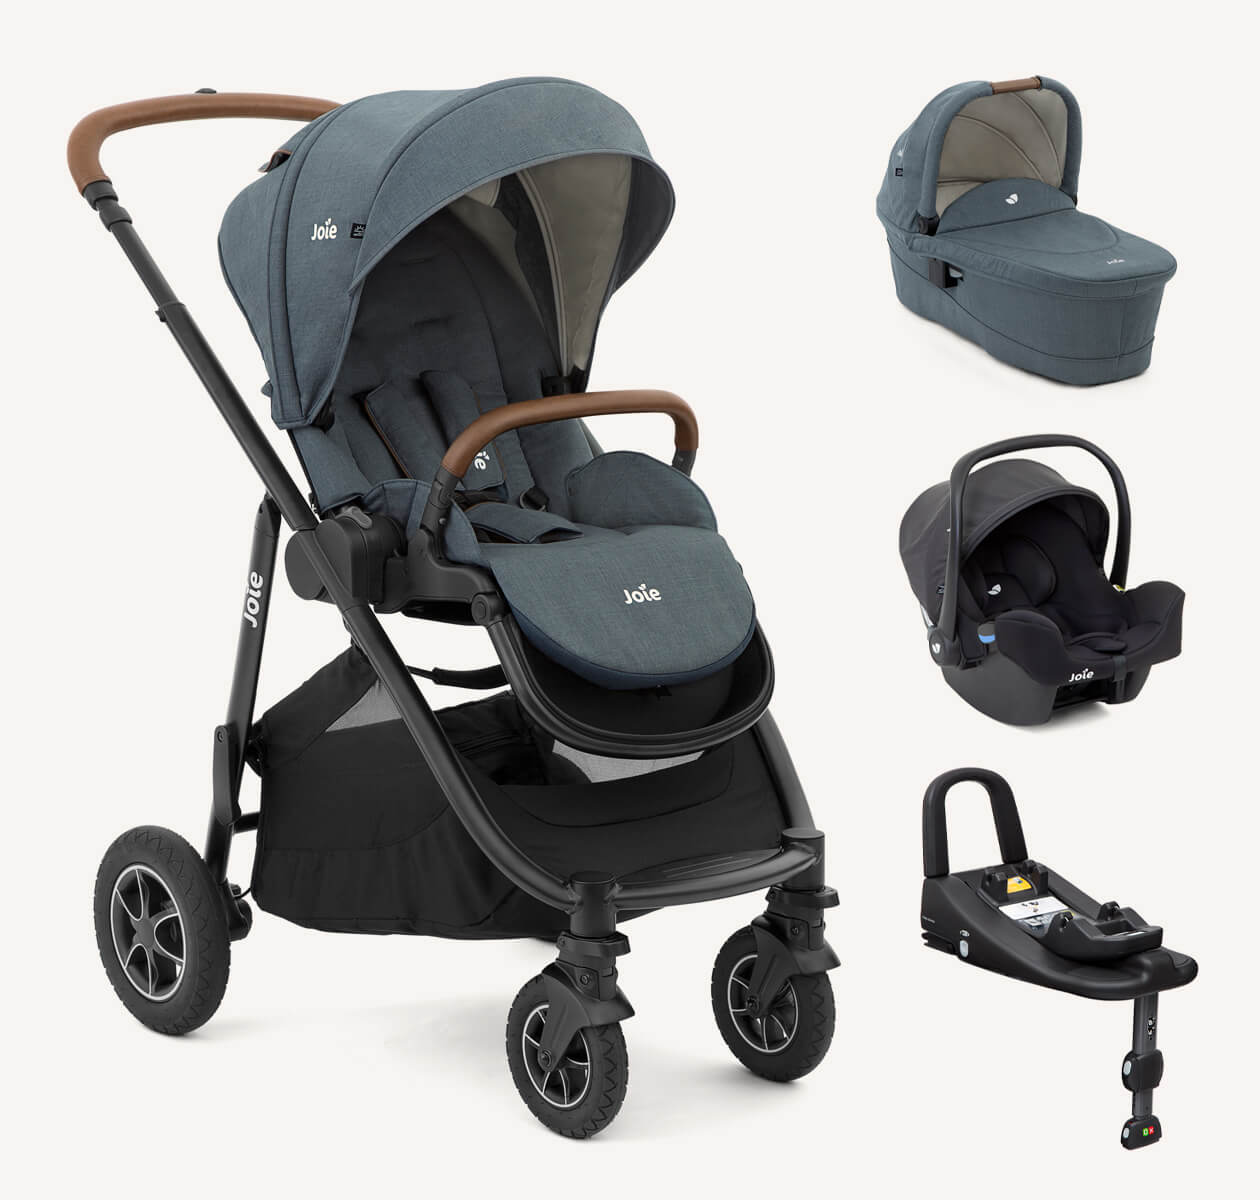 Joie Versatrax 4in1 Travel System | Carry Cot and Infant Car Seat